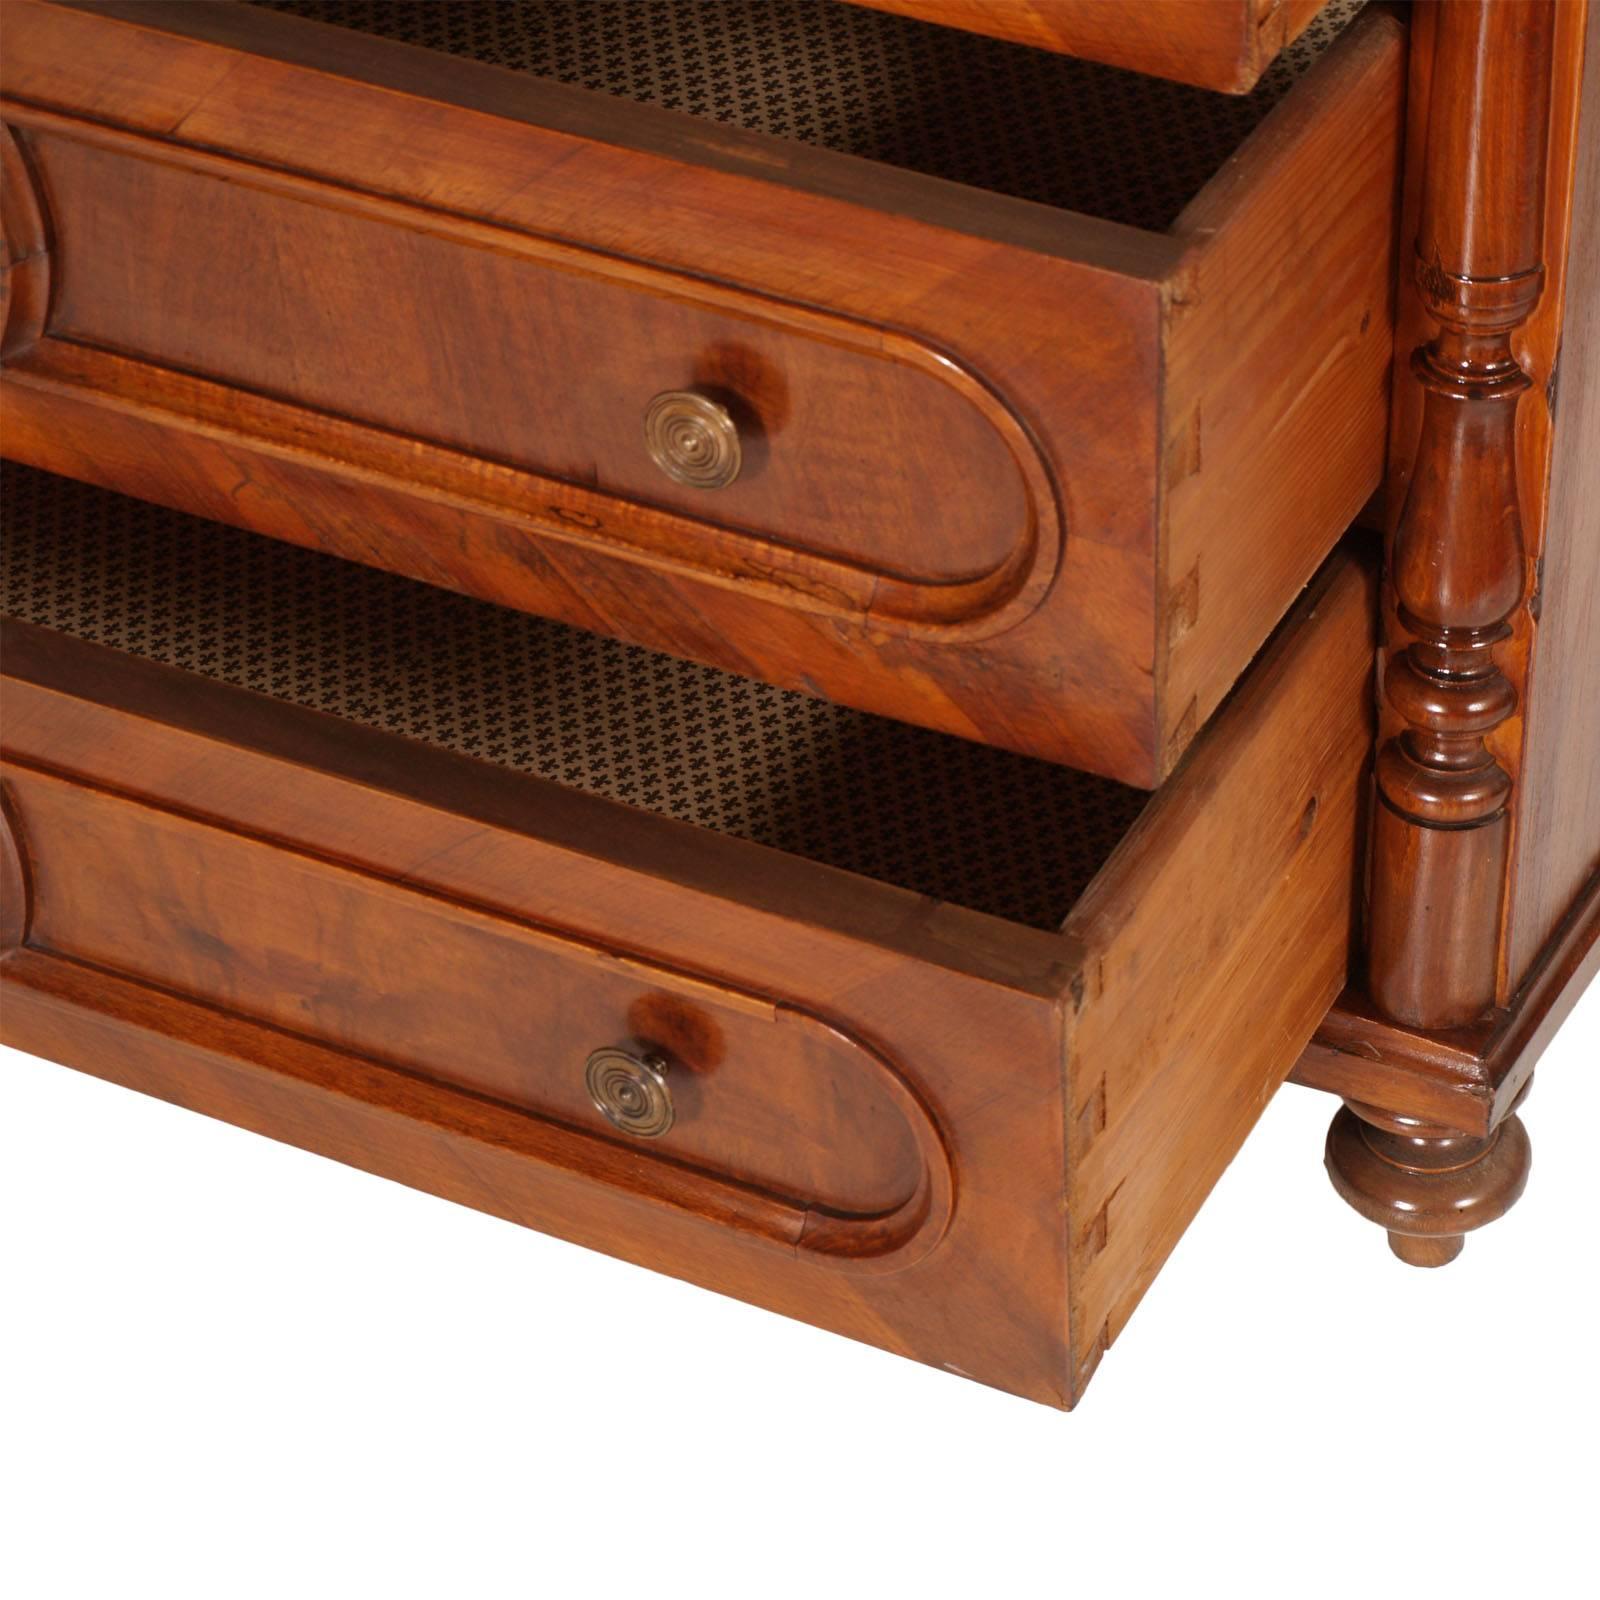 Mid 19th C. Italian Commode in blond Walnut and Walnut veneer, Polished to Wax For Sale 1